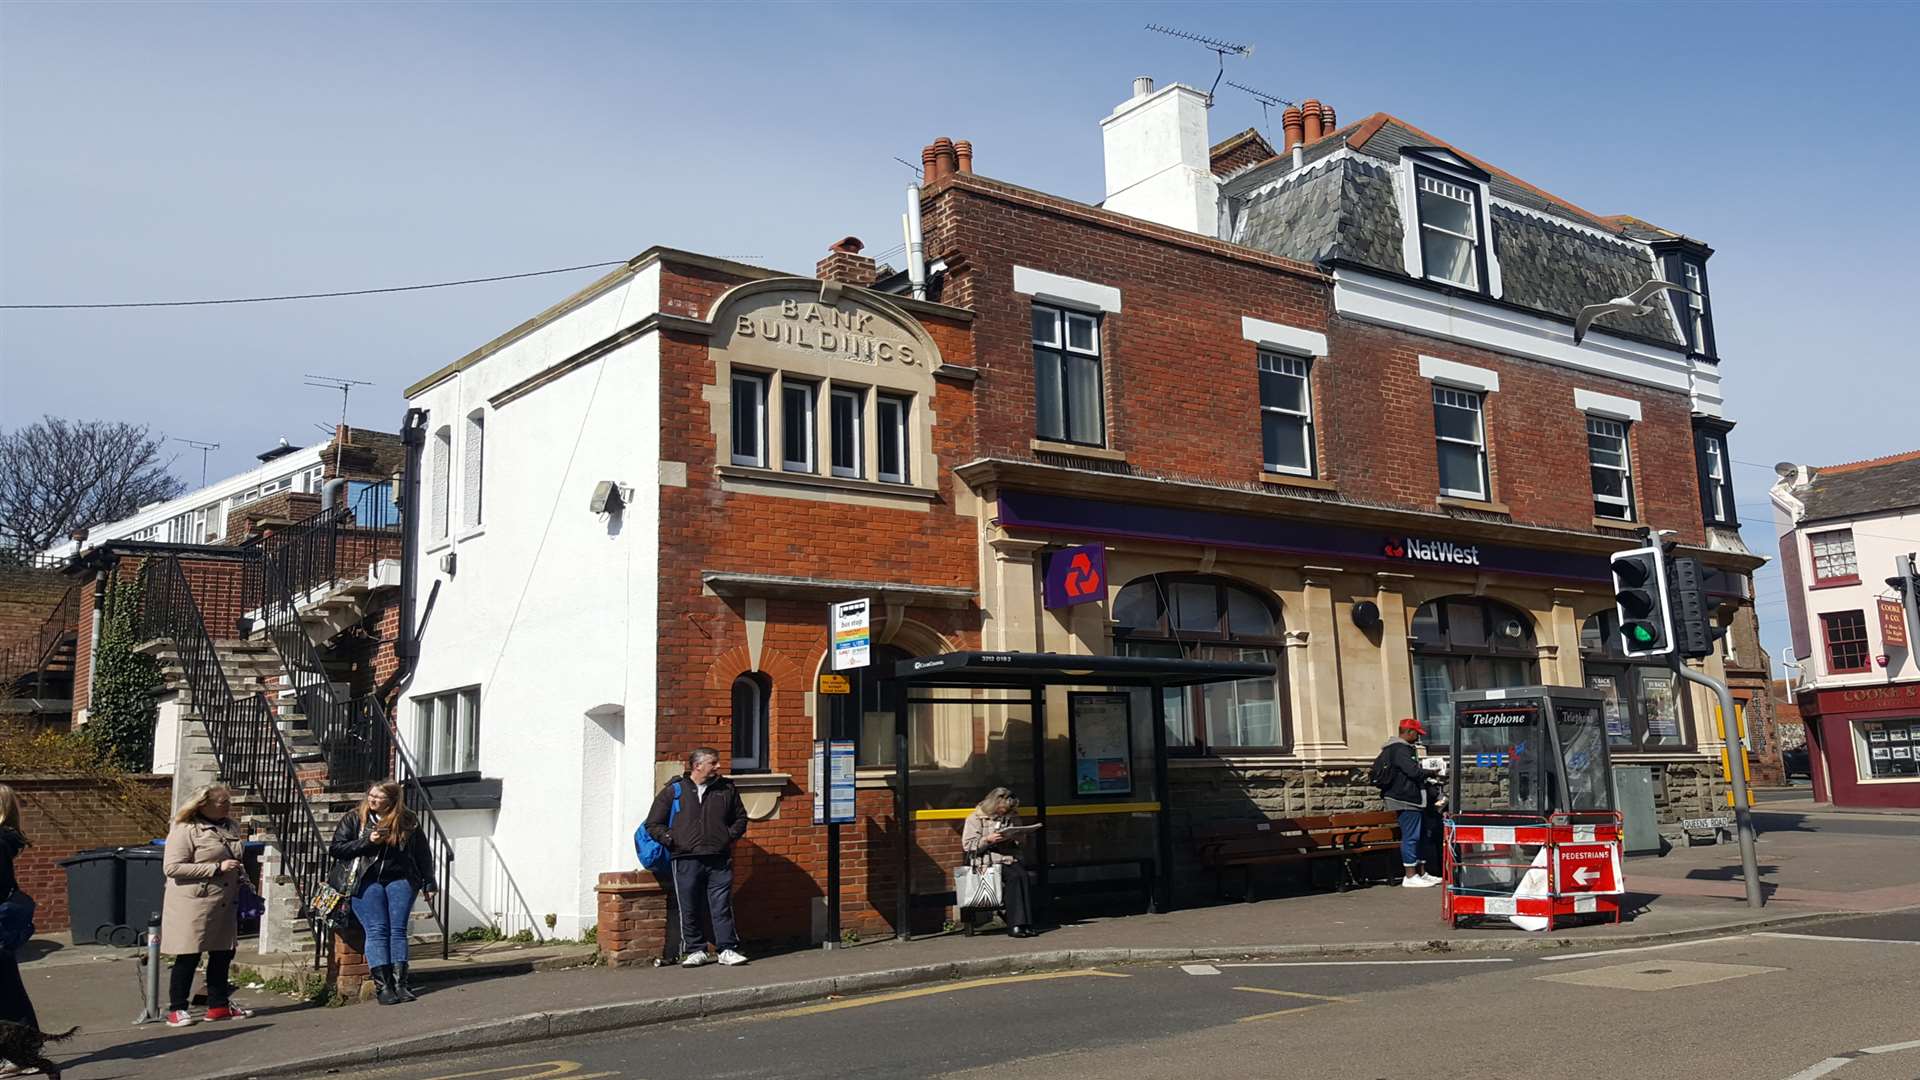 The people arrested are believed to have come from a flat above the Natwest Bank in Broadstairs